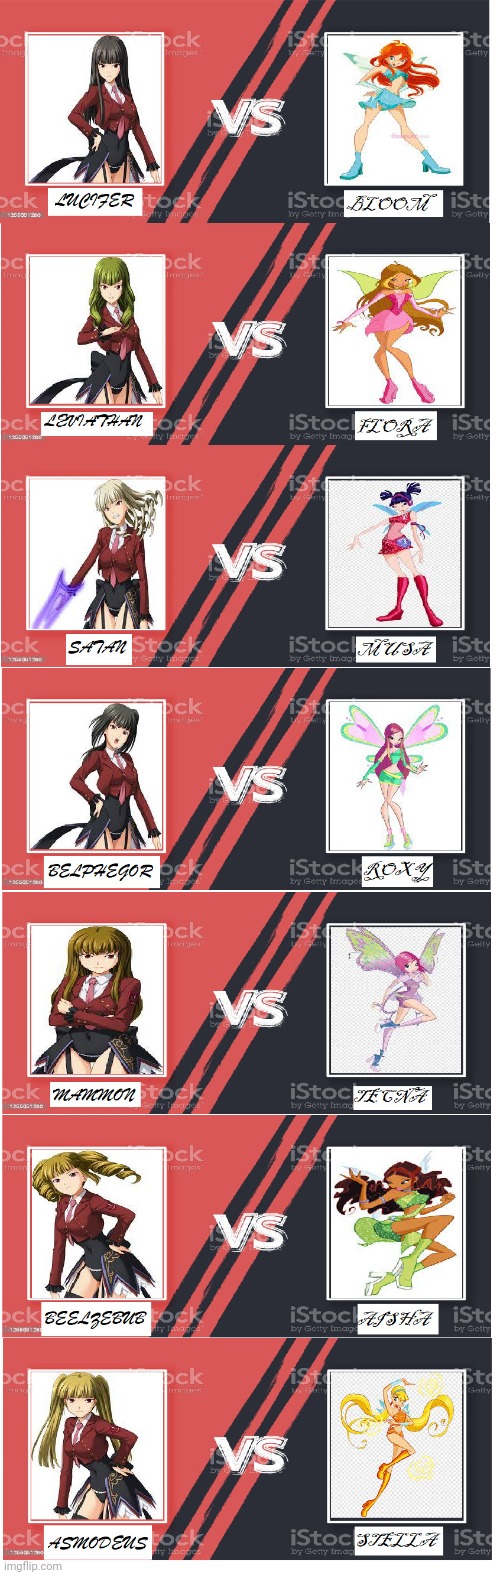 seven stake s of purgatory vs winx club part 2 | image tagged in winx club,cartoons,anime,death battle | made w/ Imgflip meme maker